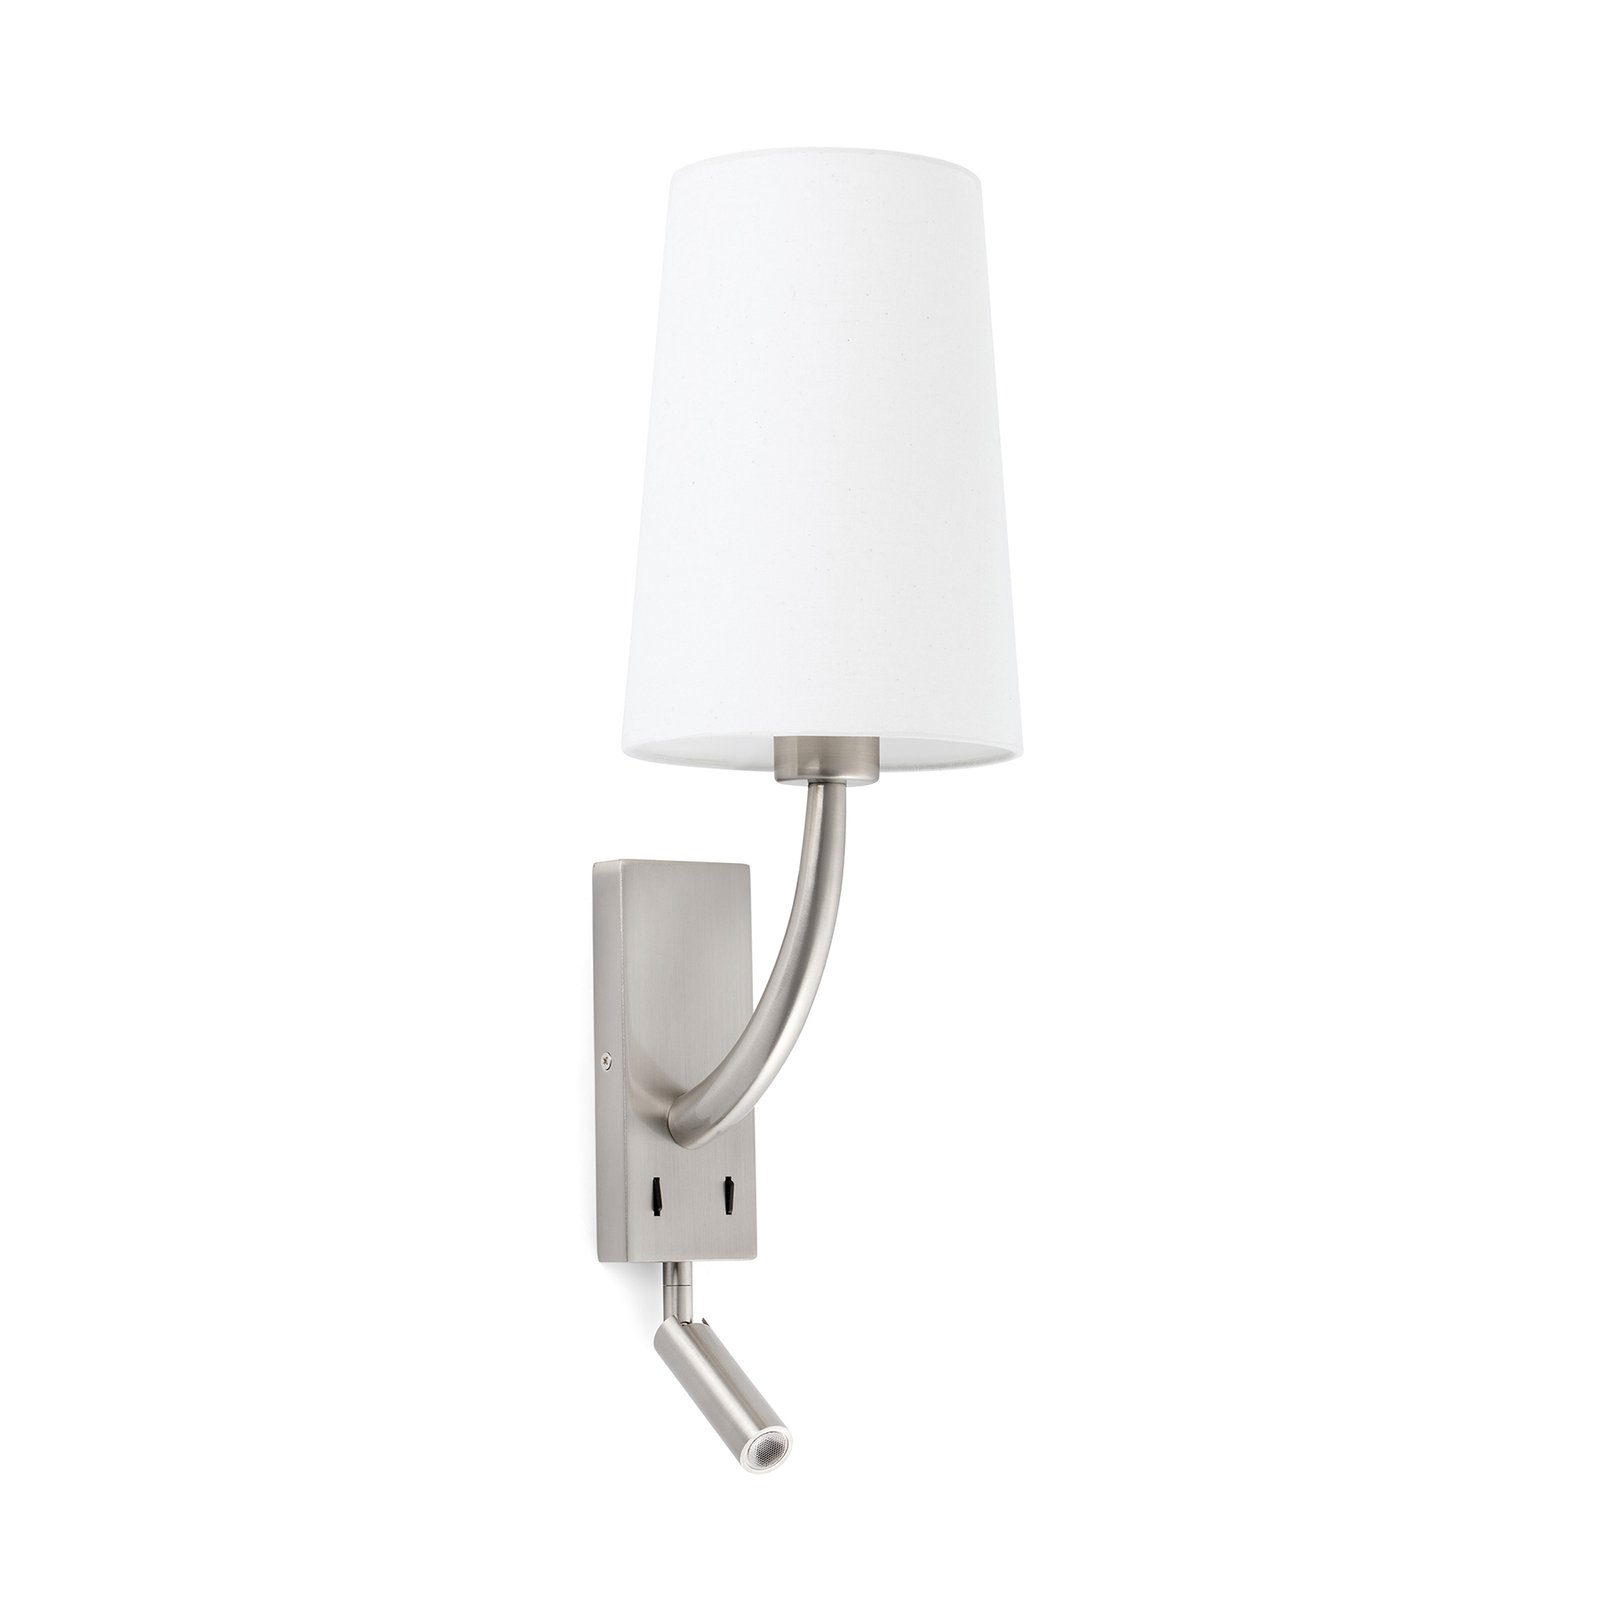 Rem wall light with LED reading light white/nickel